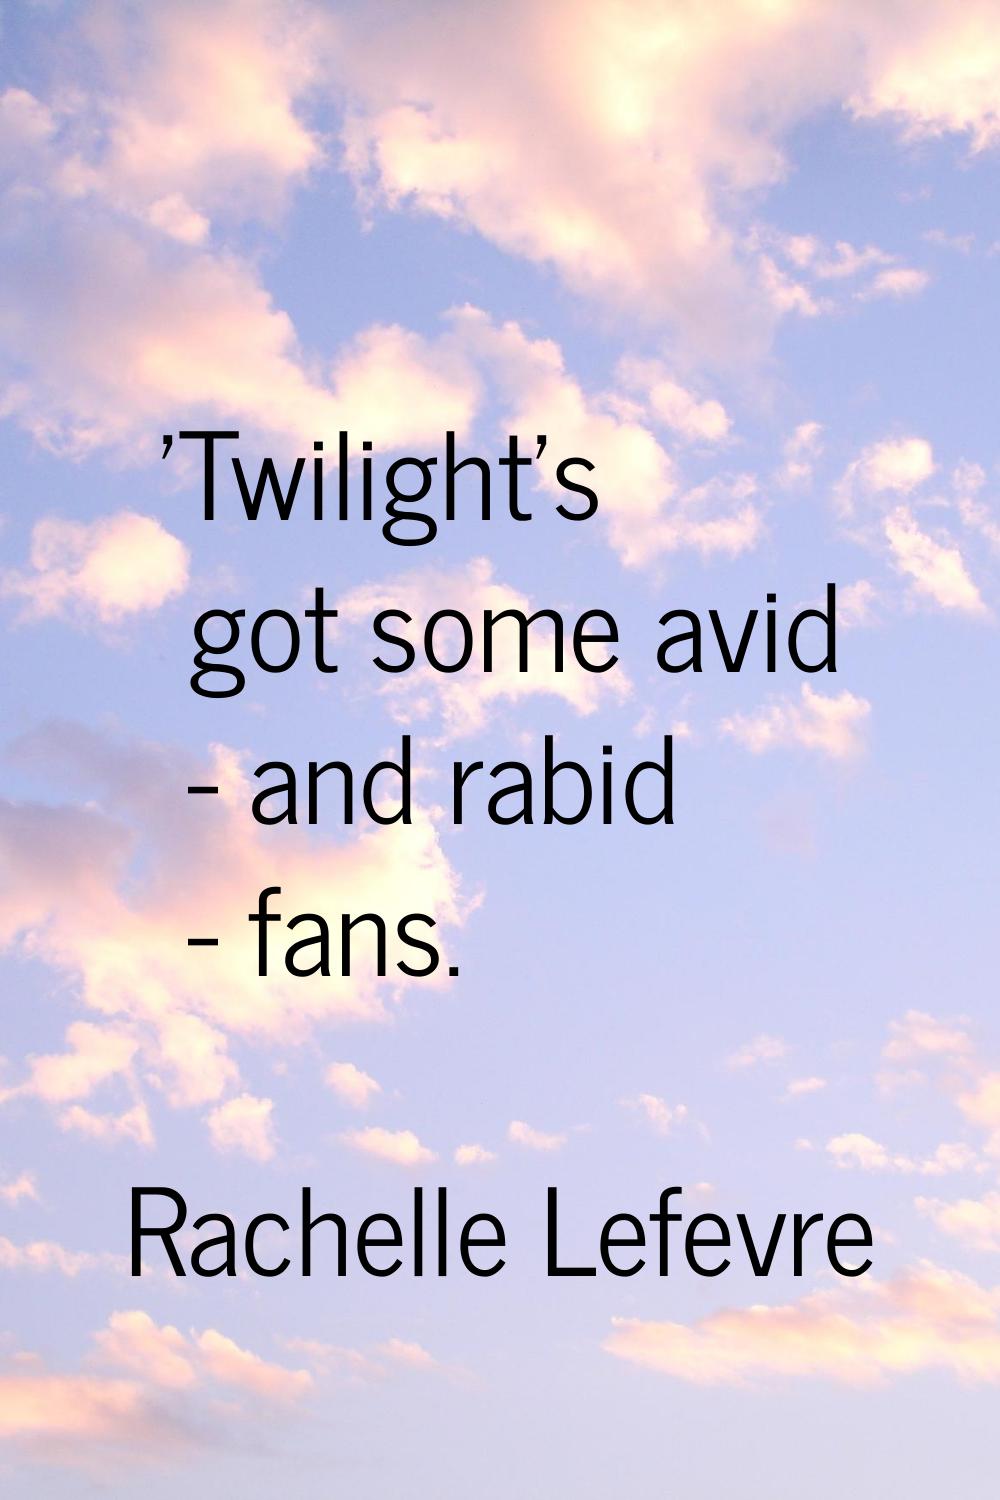 'Twilight's got some avid - and rabid - fans.